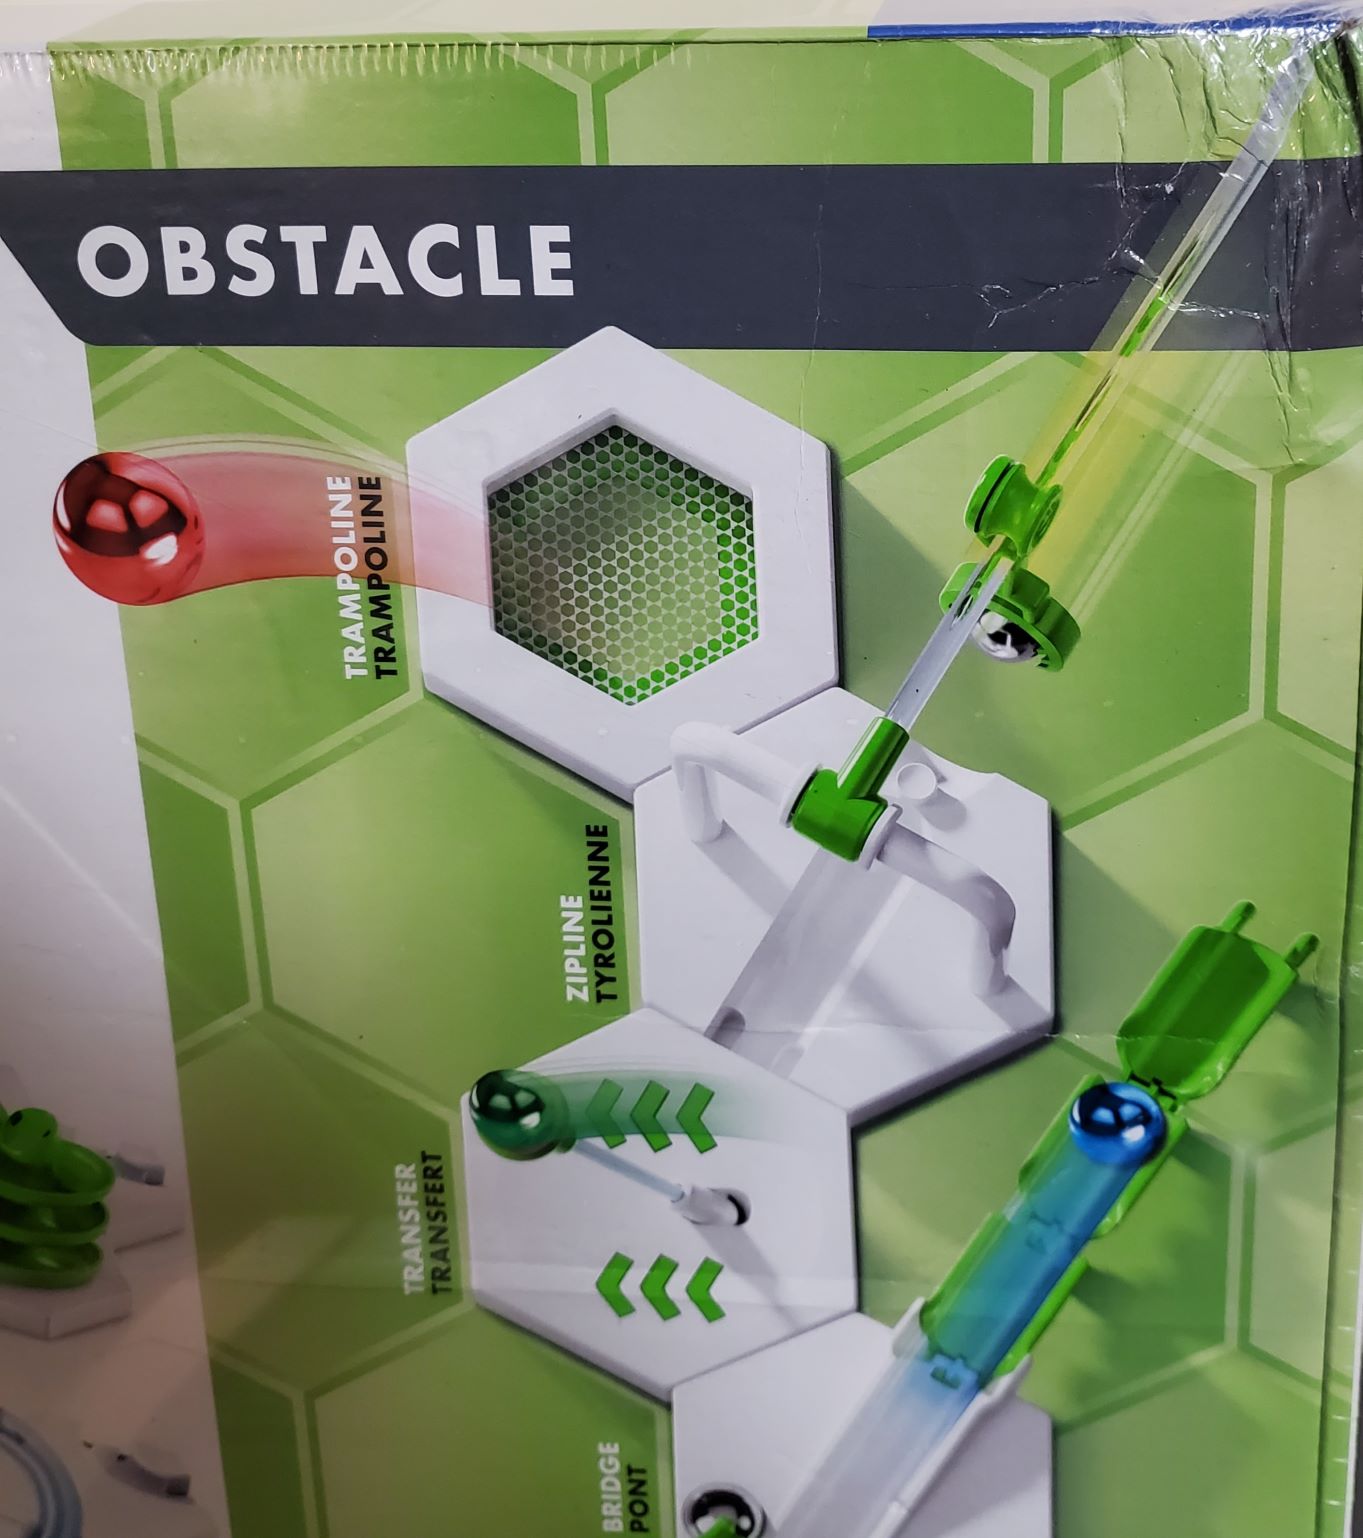 The – Obstacle Puzzle Ravensburger Gravitrax Course Set Collections